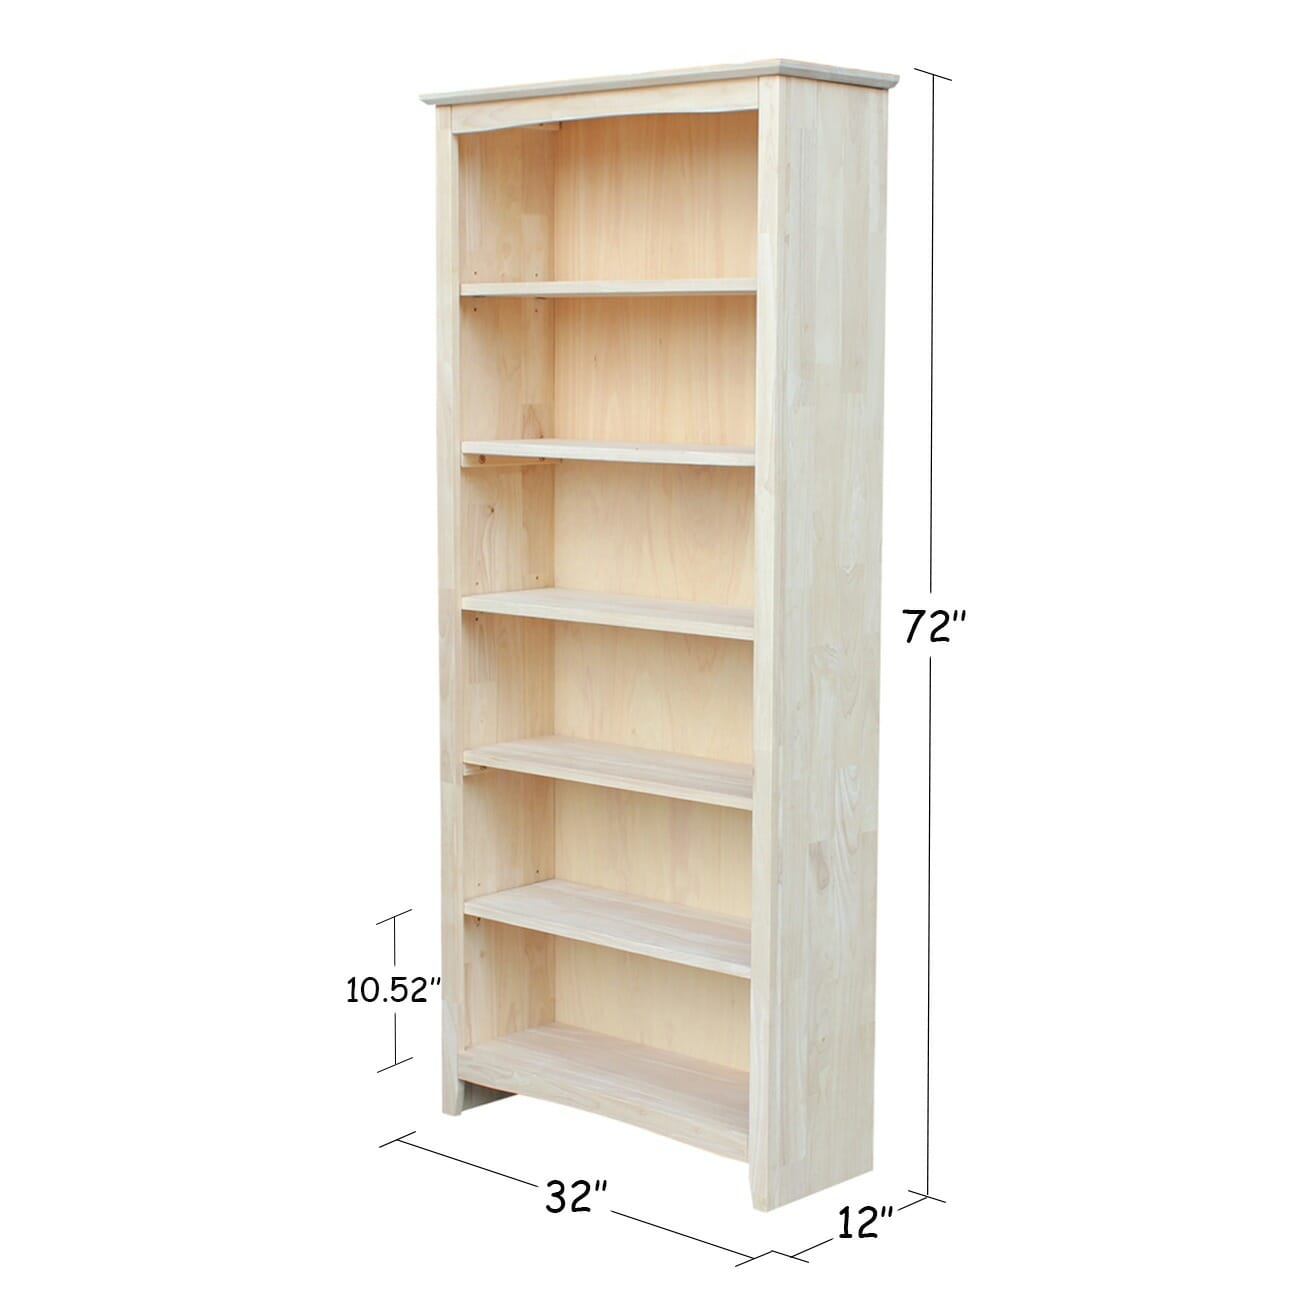 SH-3227A 32" X 72" Tall Shaker Bookcase Unfinished ...